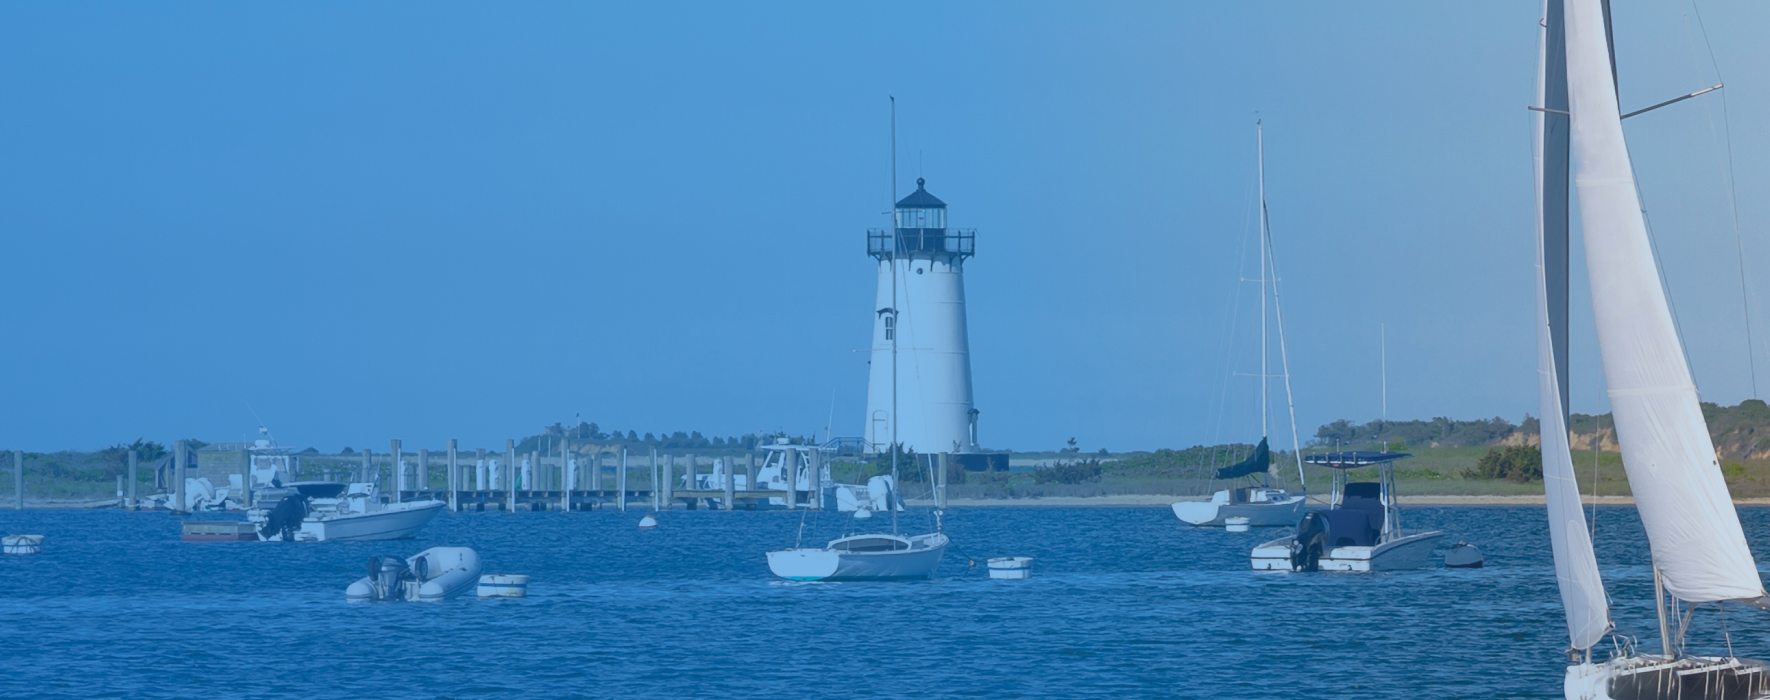 Lighthouse near shore filled with boats